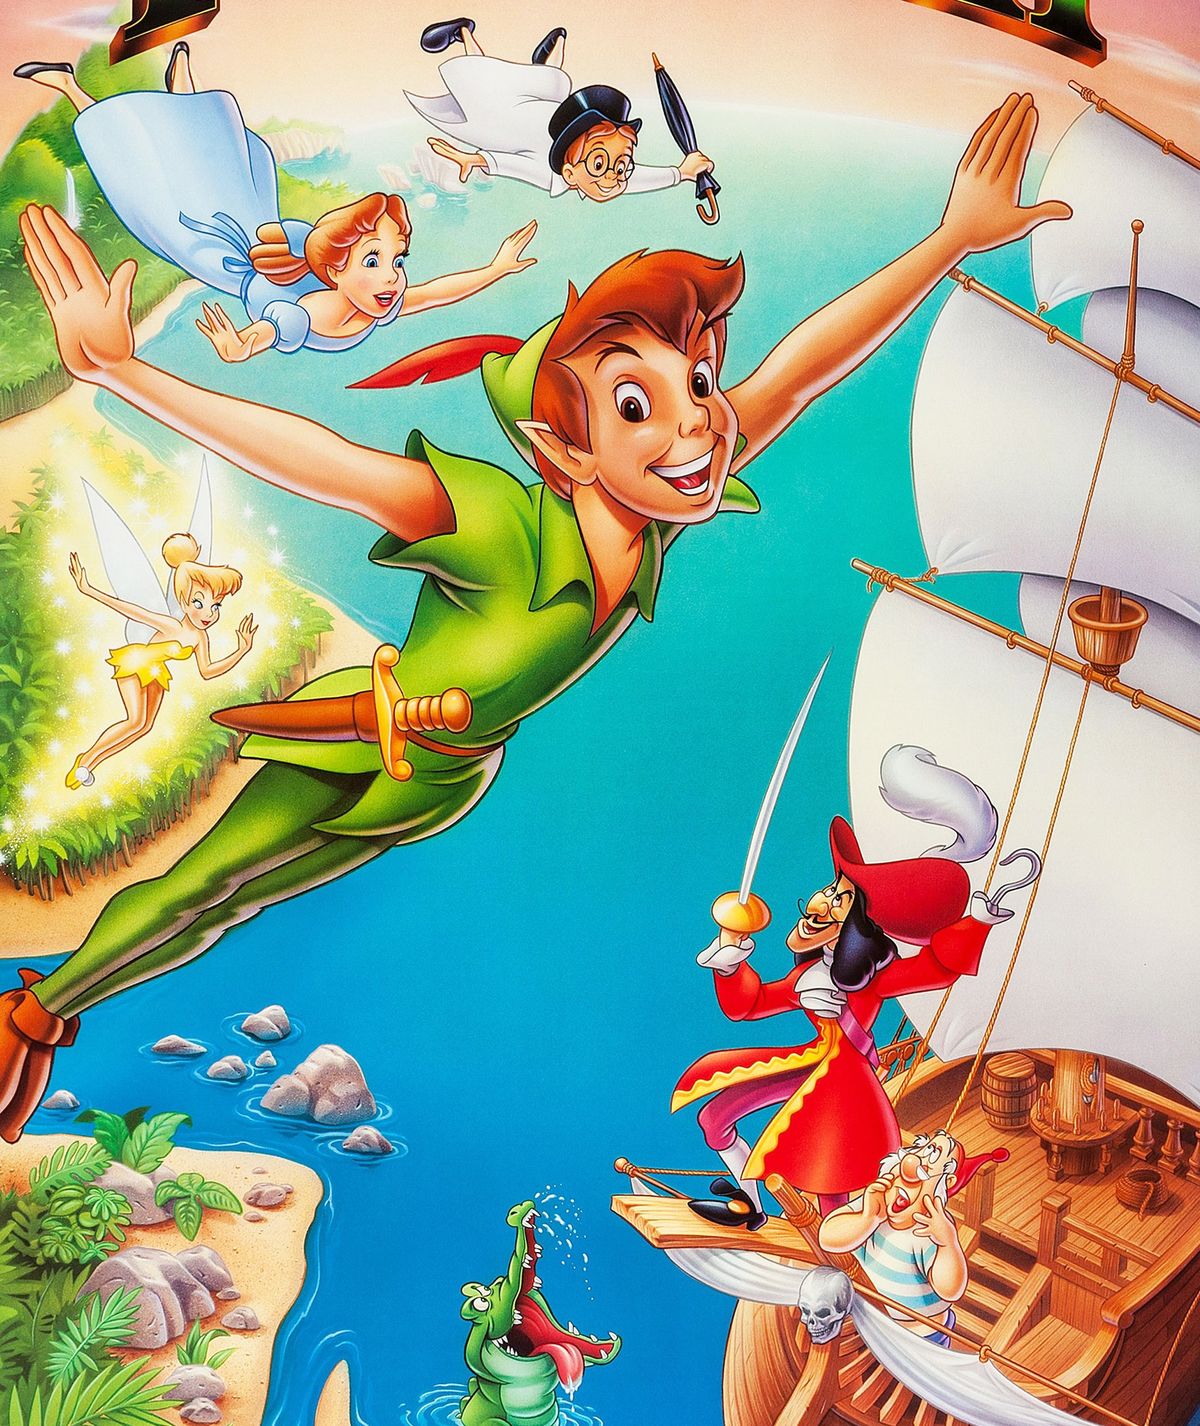 Peter Pan & Wendy Remake News, Release Date, Cast, Plot, and Spoilers